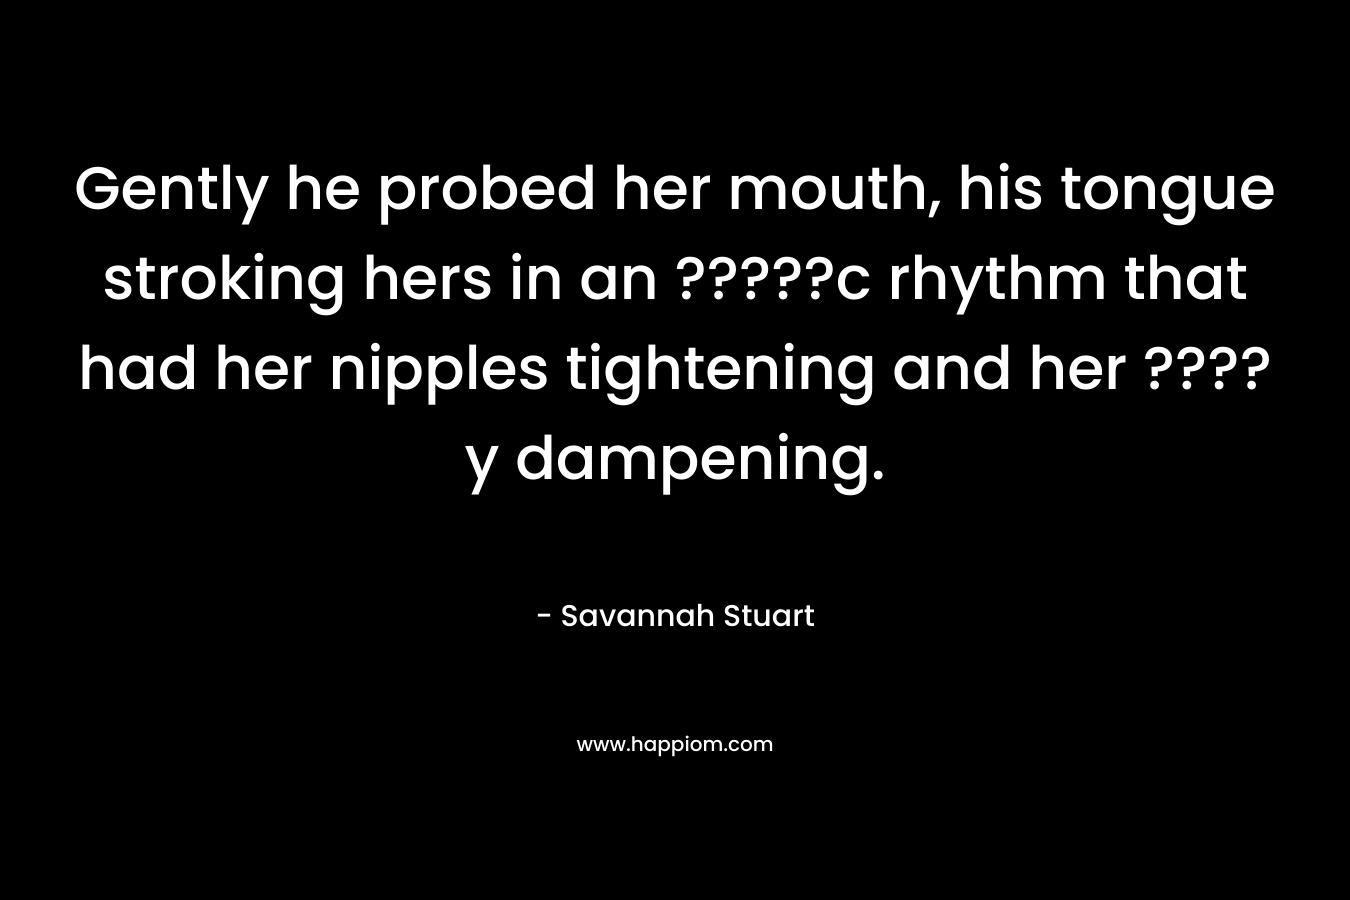 Gently he probed her mouth, his tongue stroking hers in an ?????c rhythm that had her nipples tightening and her ????y dampening. – Savannah Stuart